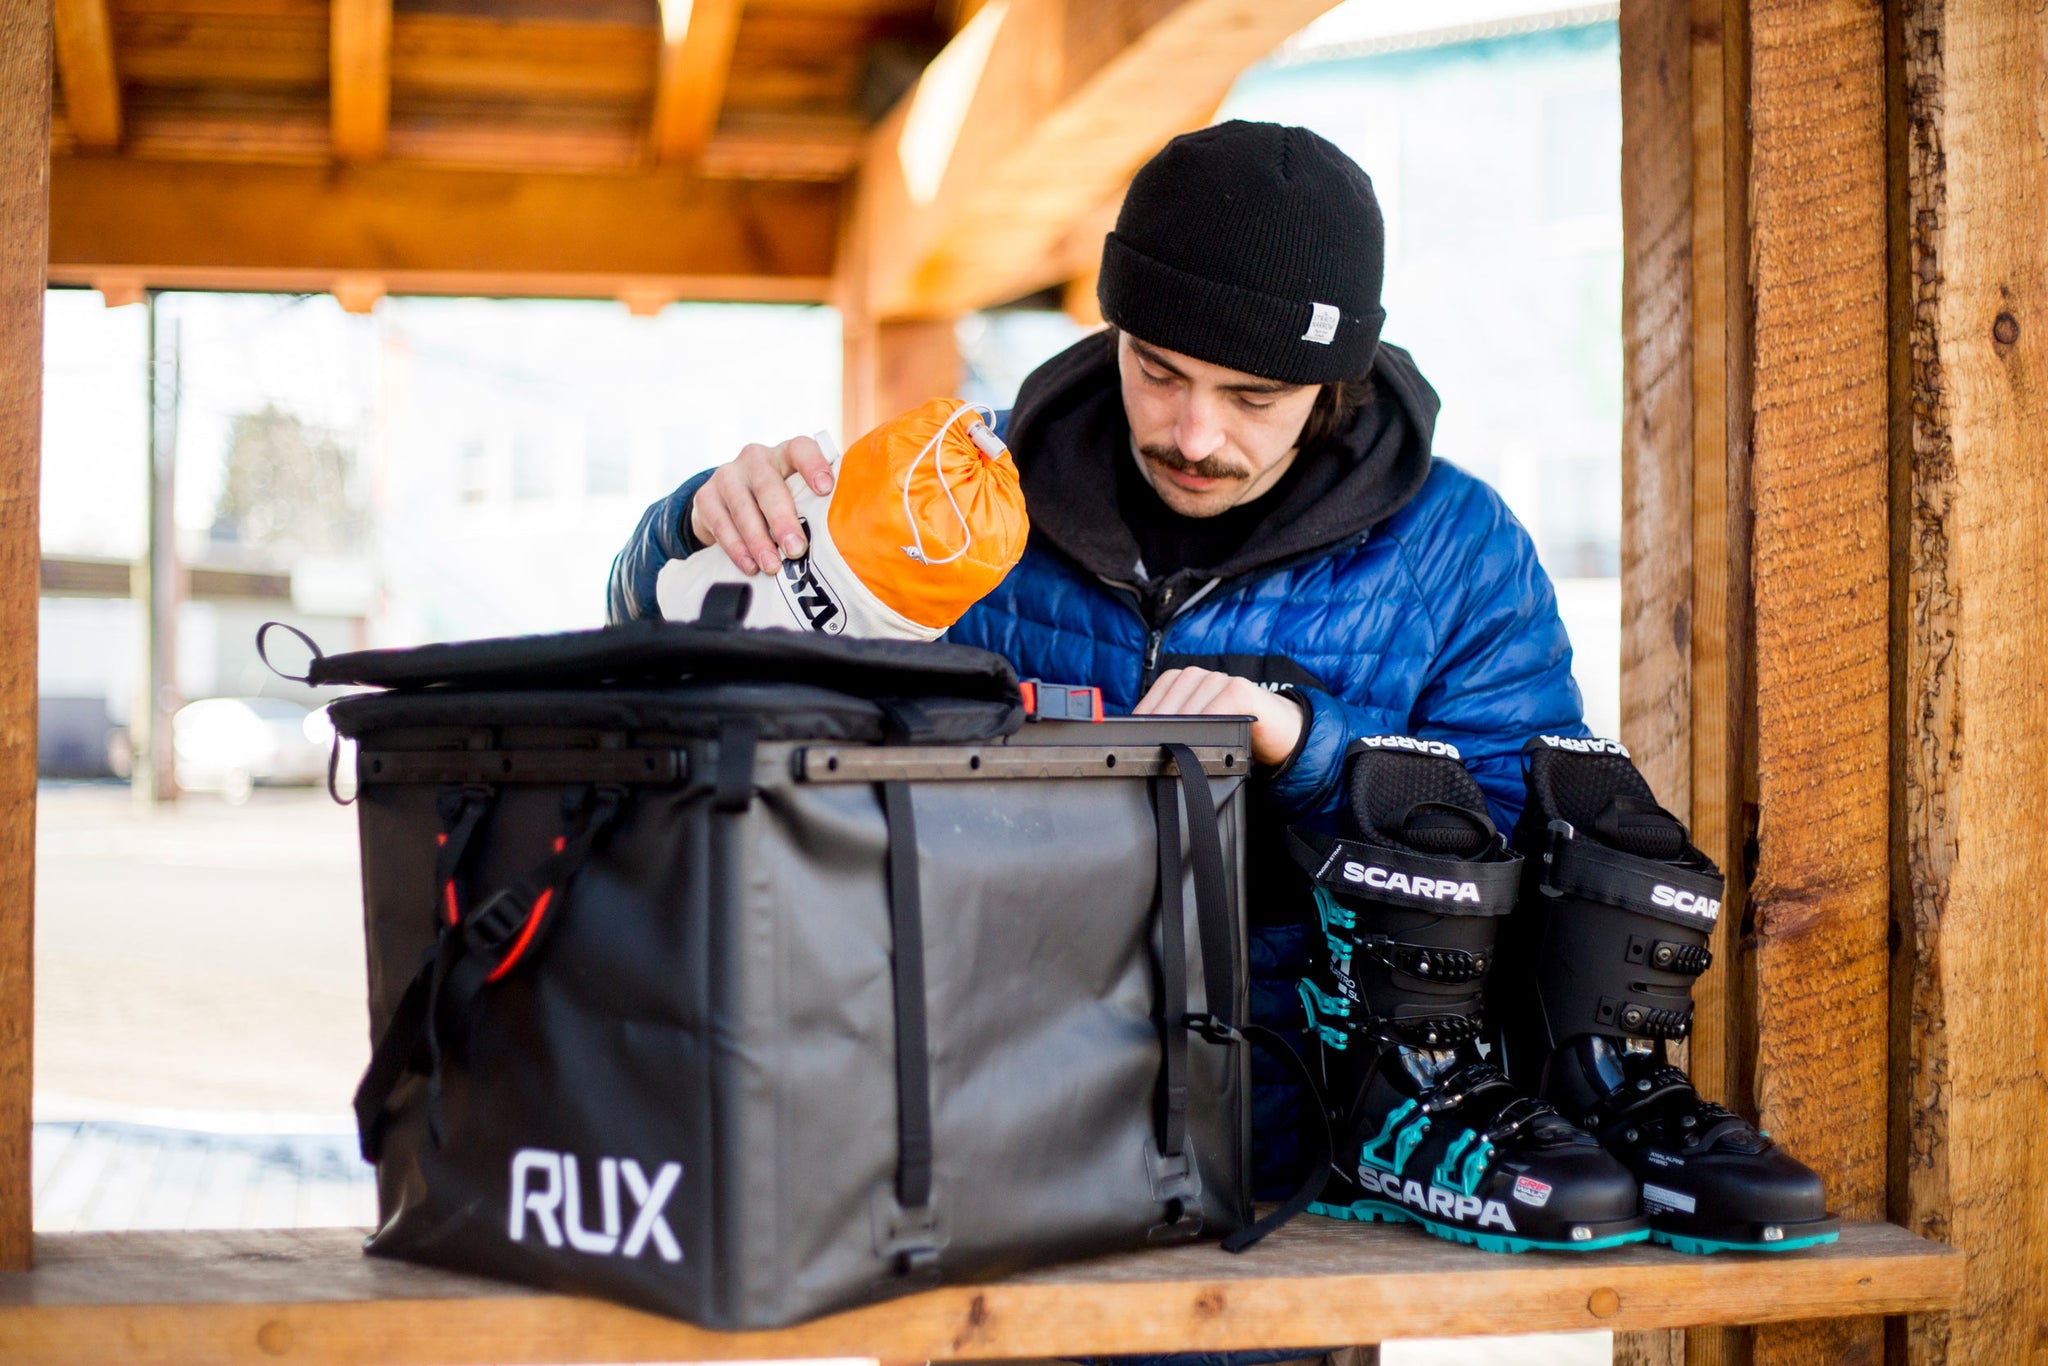 How to pack for Backcountry Skiing